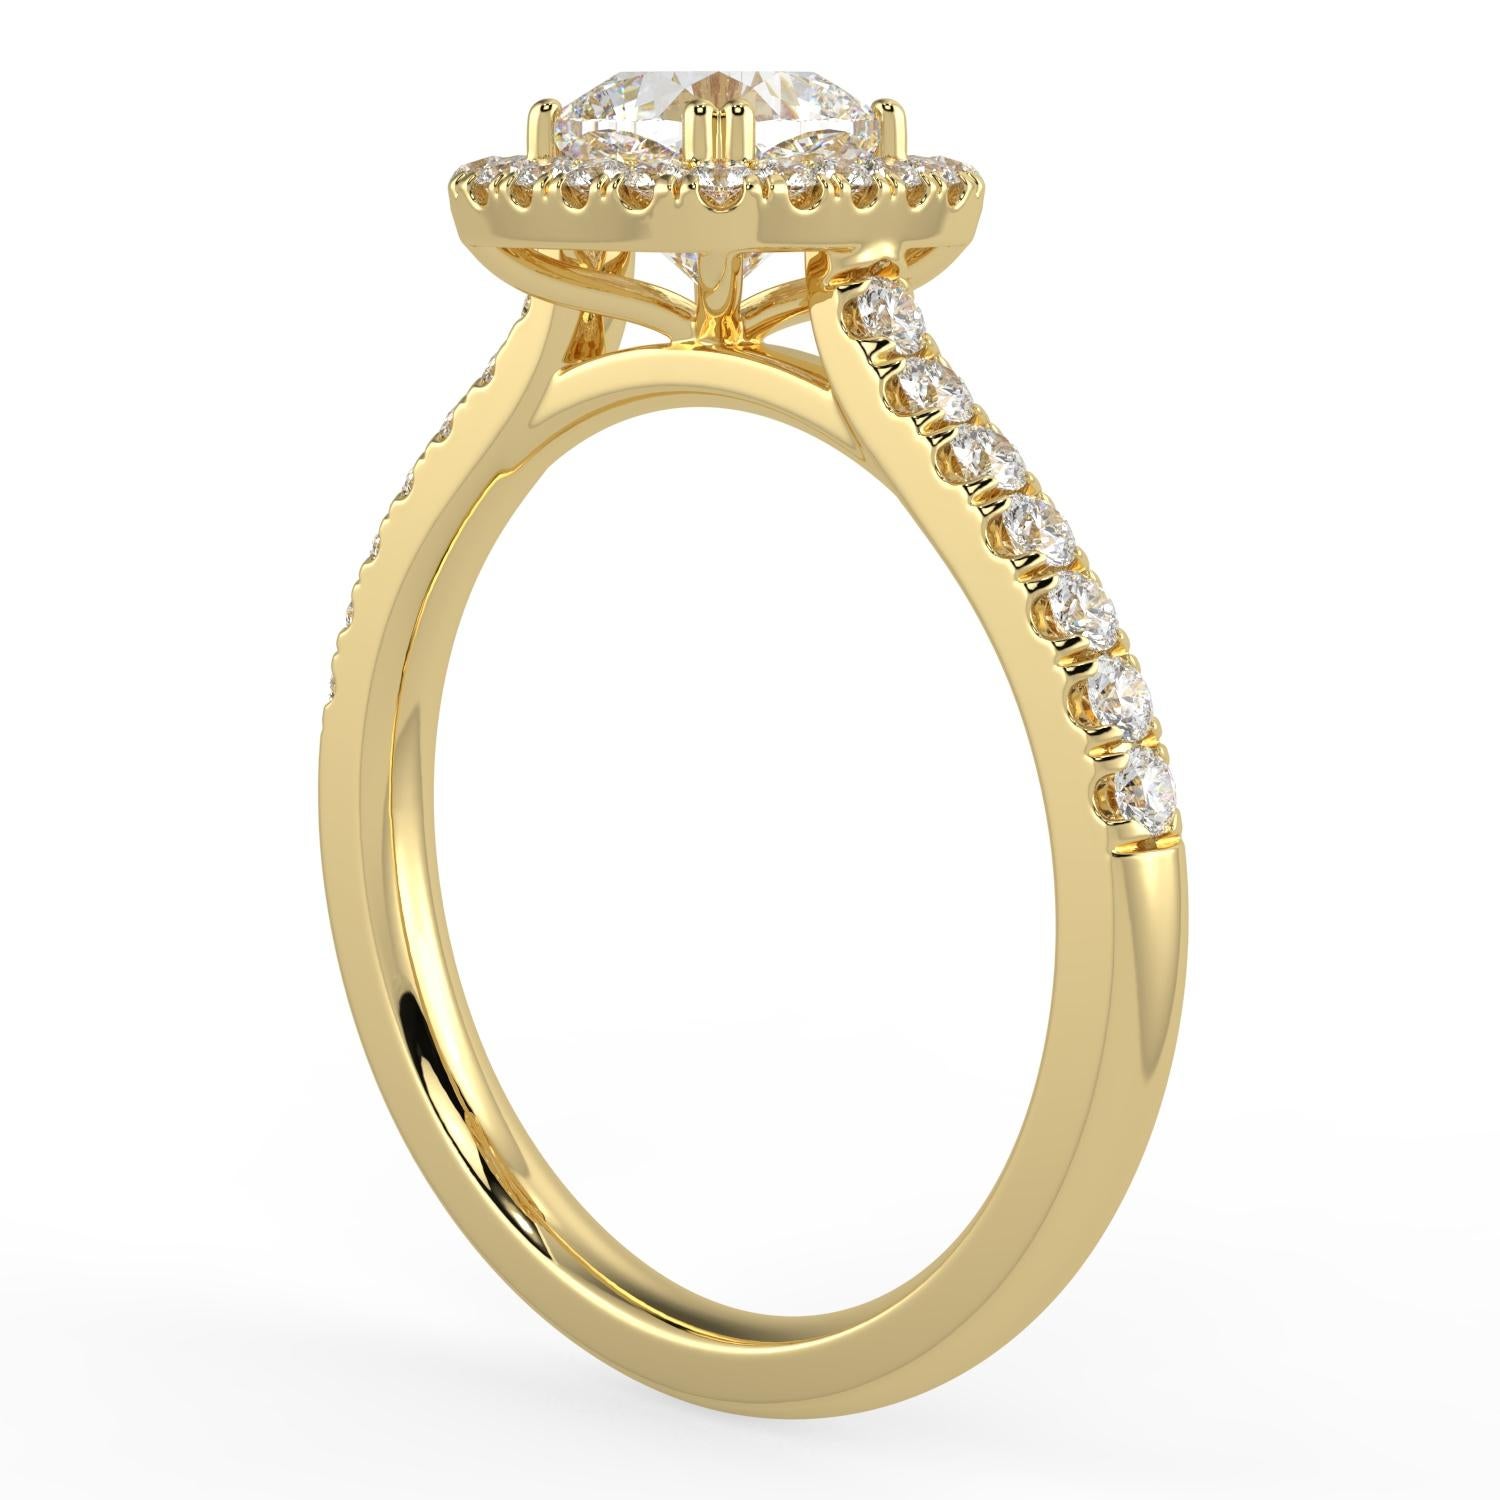 1ct Natural Diamond G-H Color SI Clarity Perfect Design Shape Halo Fashion Stunning Promise Ring 14K Yellow Gold

Specification:
Brand: Aamiaa
Metal: Yellow Gold
Metal Purity: 14k
Center Diamond Shape: Cube
Design: Halo-Cushion
Center Carat Weight: